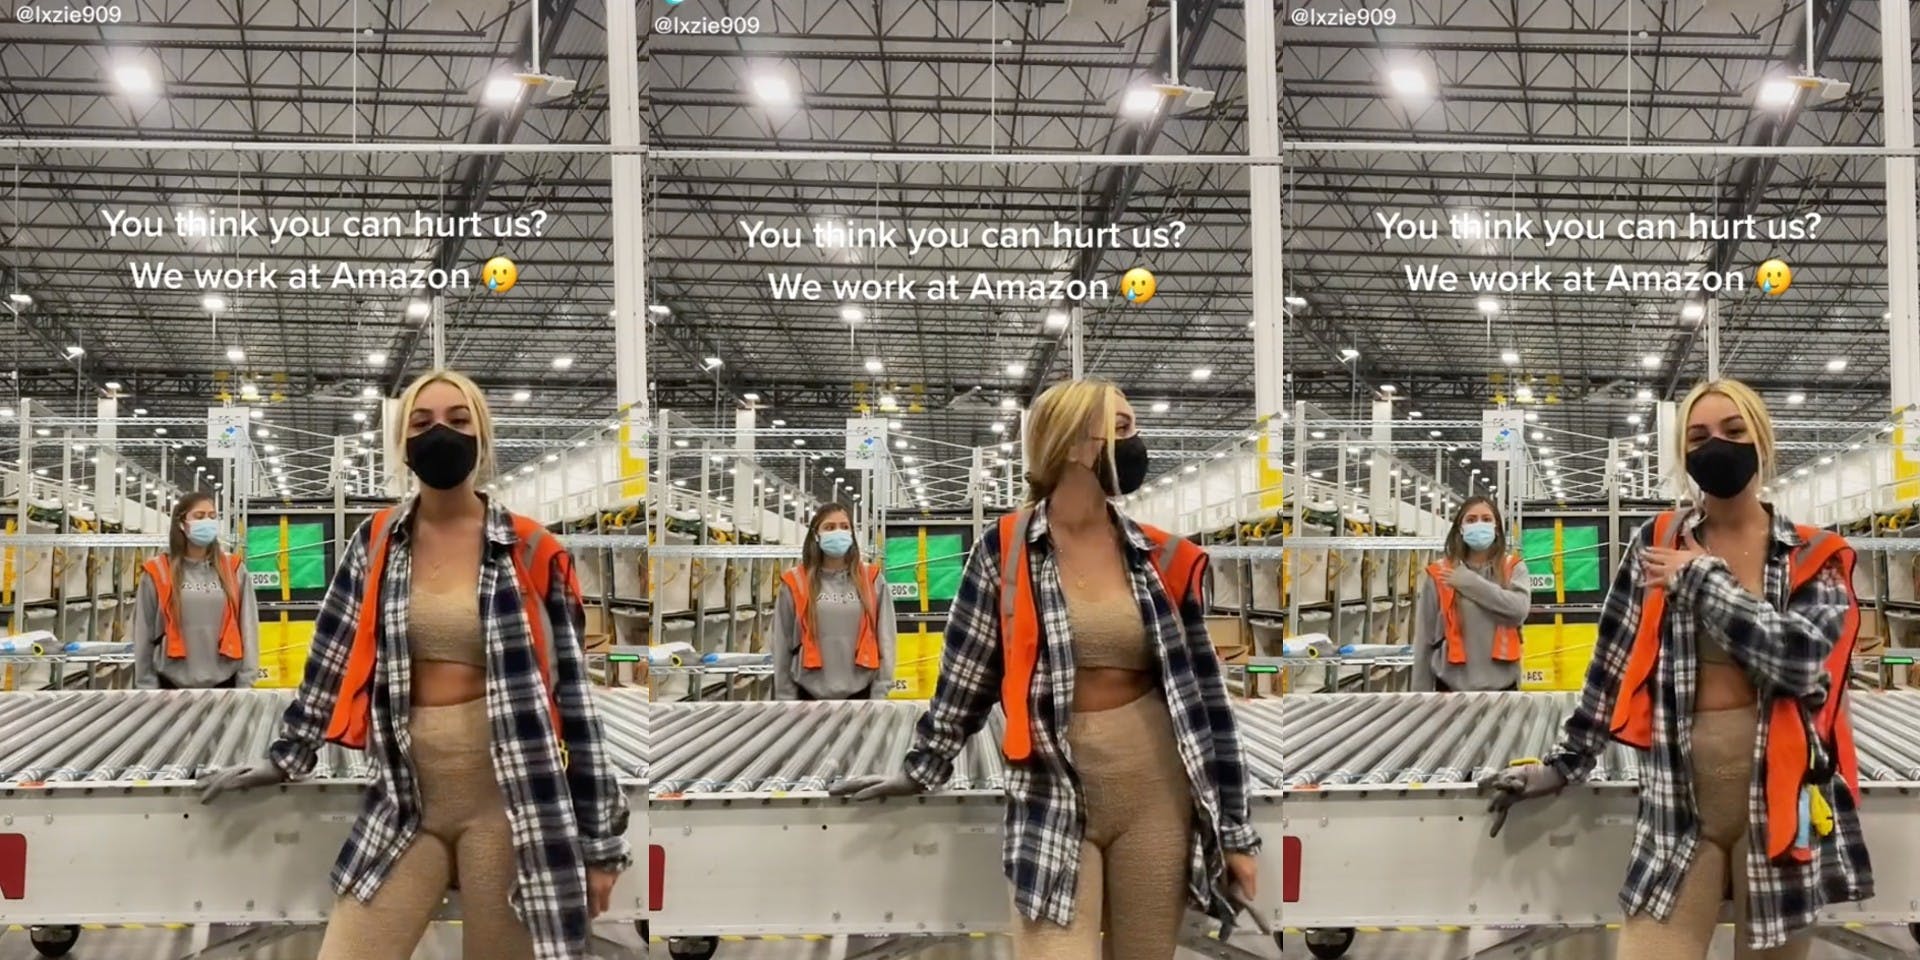 Amazon Warehouse Worker Criticized for Outfit on TikTok